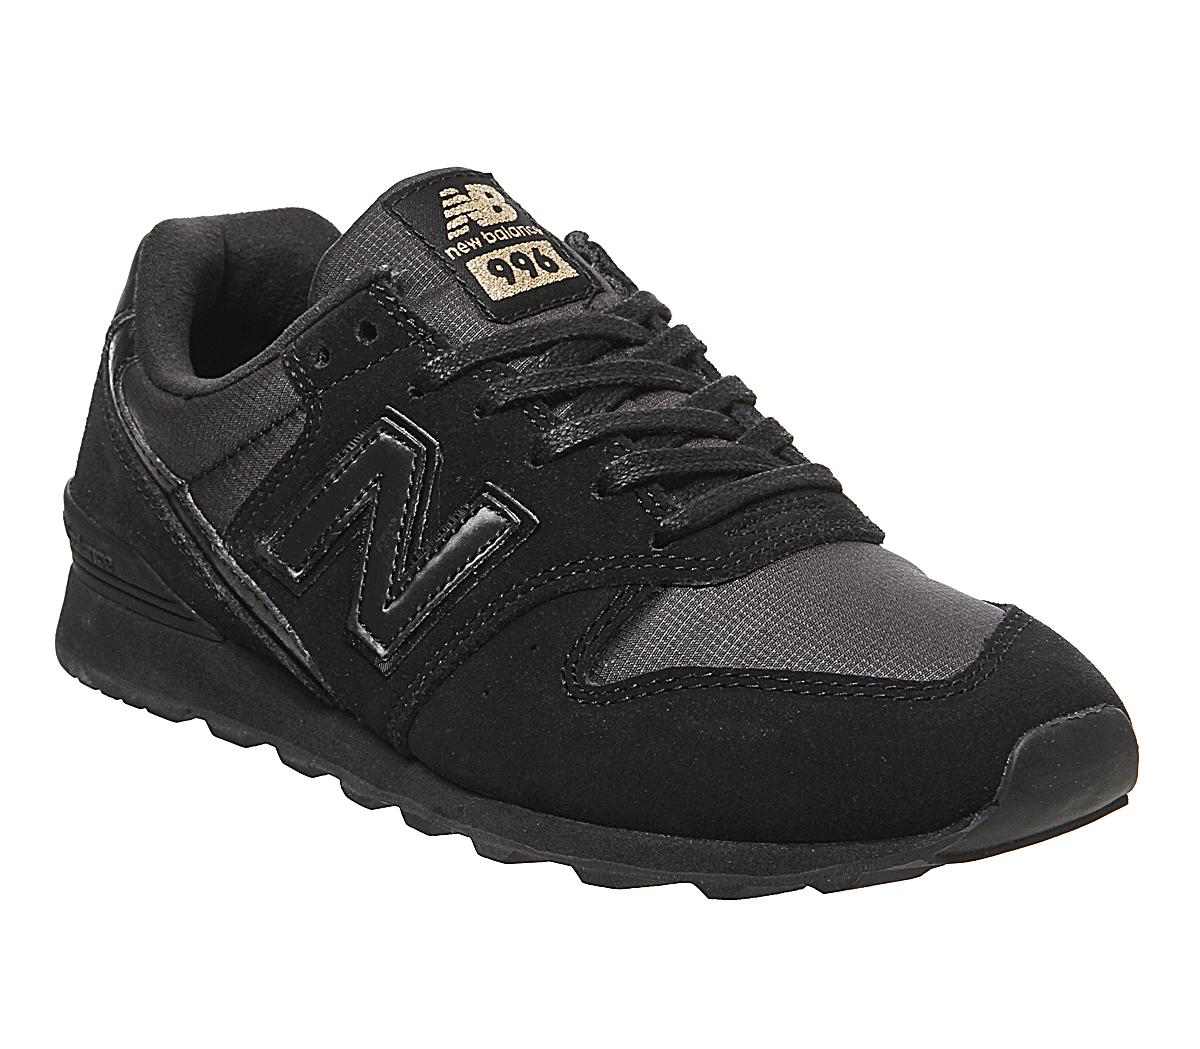 New Balance 996 Black Gold - Hers trainers